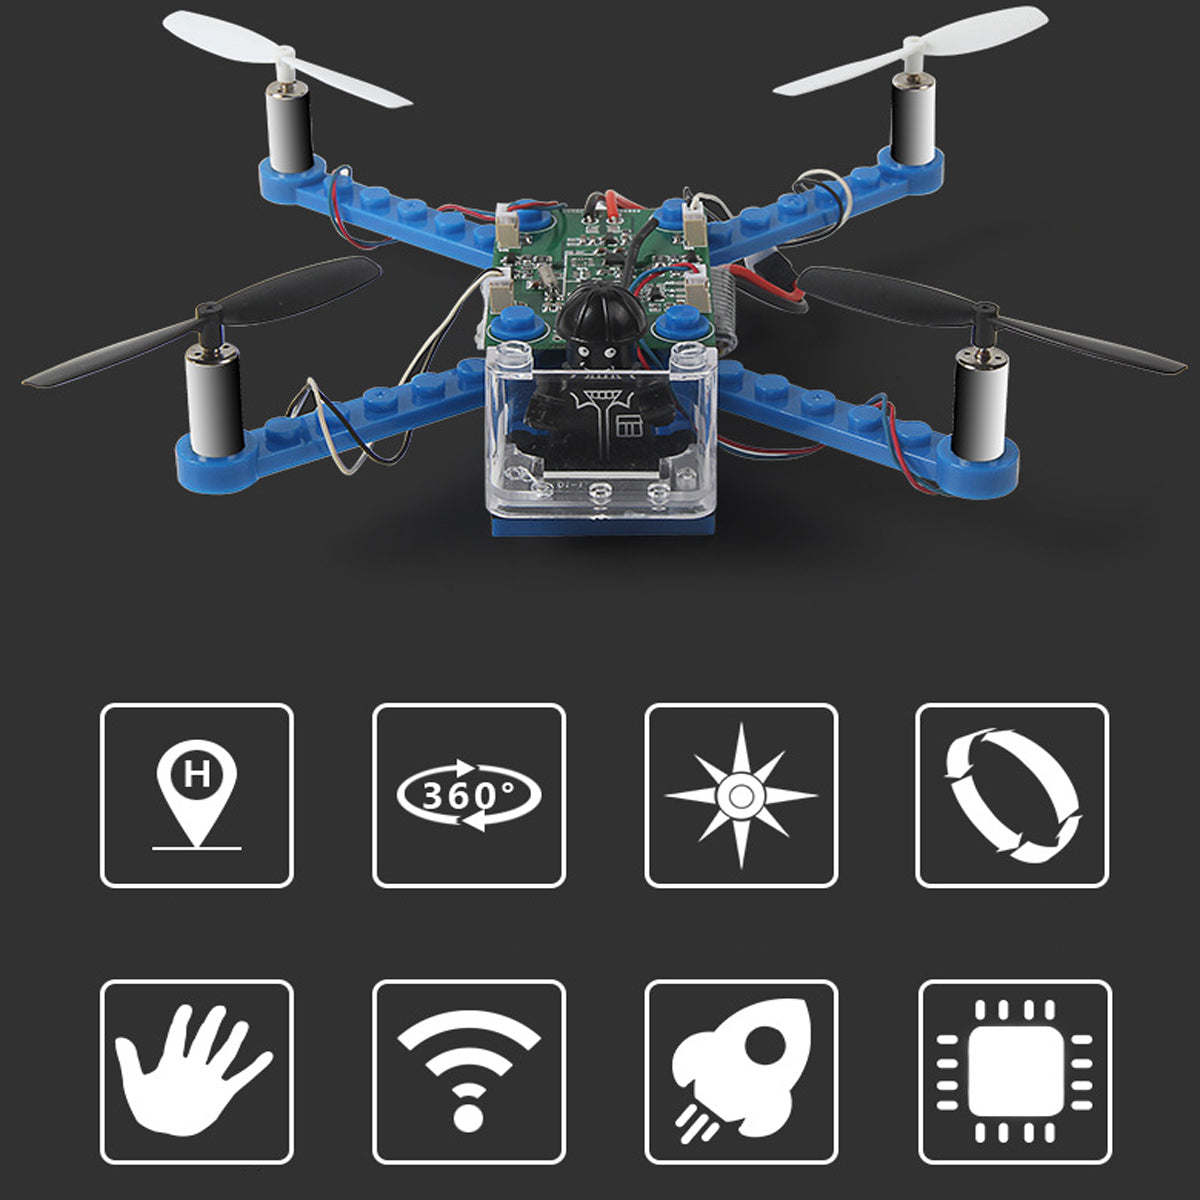 A kids' DIY Drone Building STEM Project For Kids with a remote control attached to it, perfect for STEM projects.